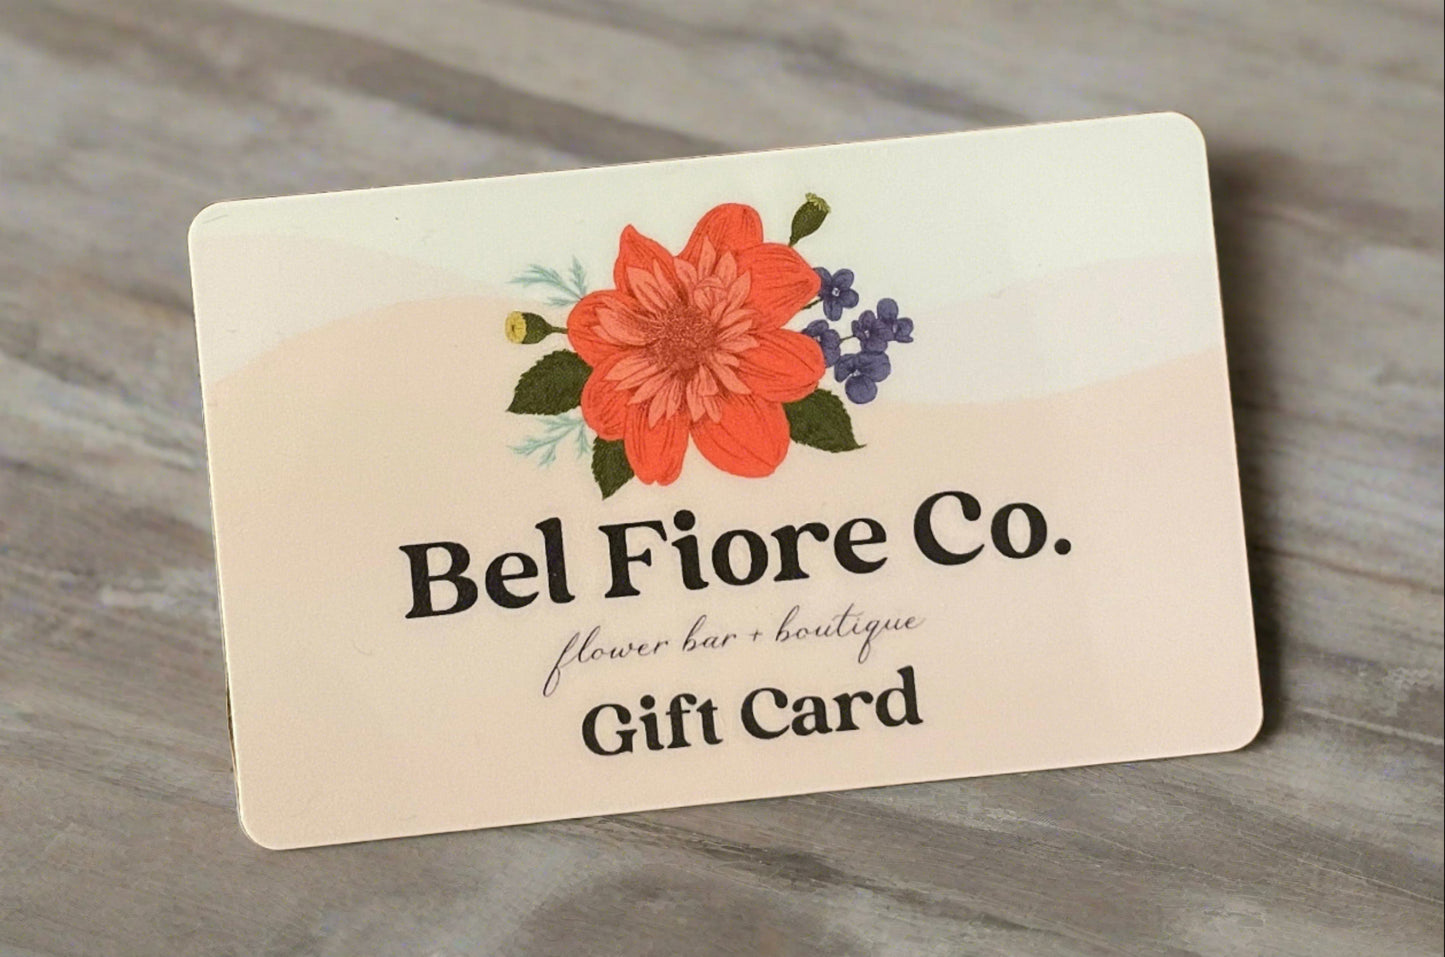 Bel Fiore Co. Gift Card